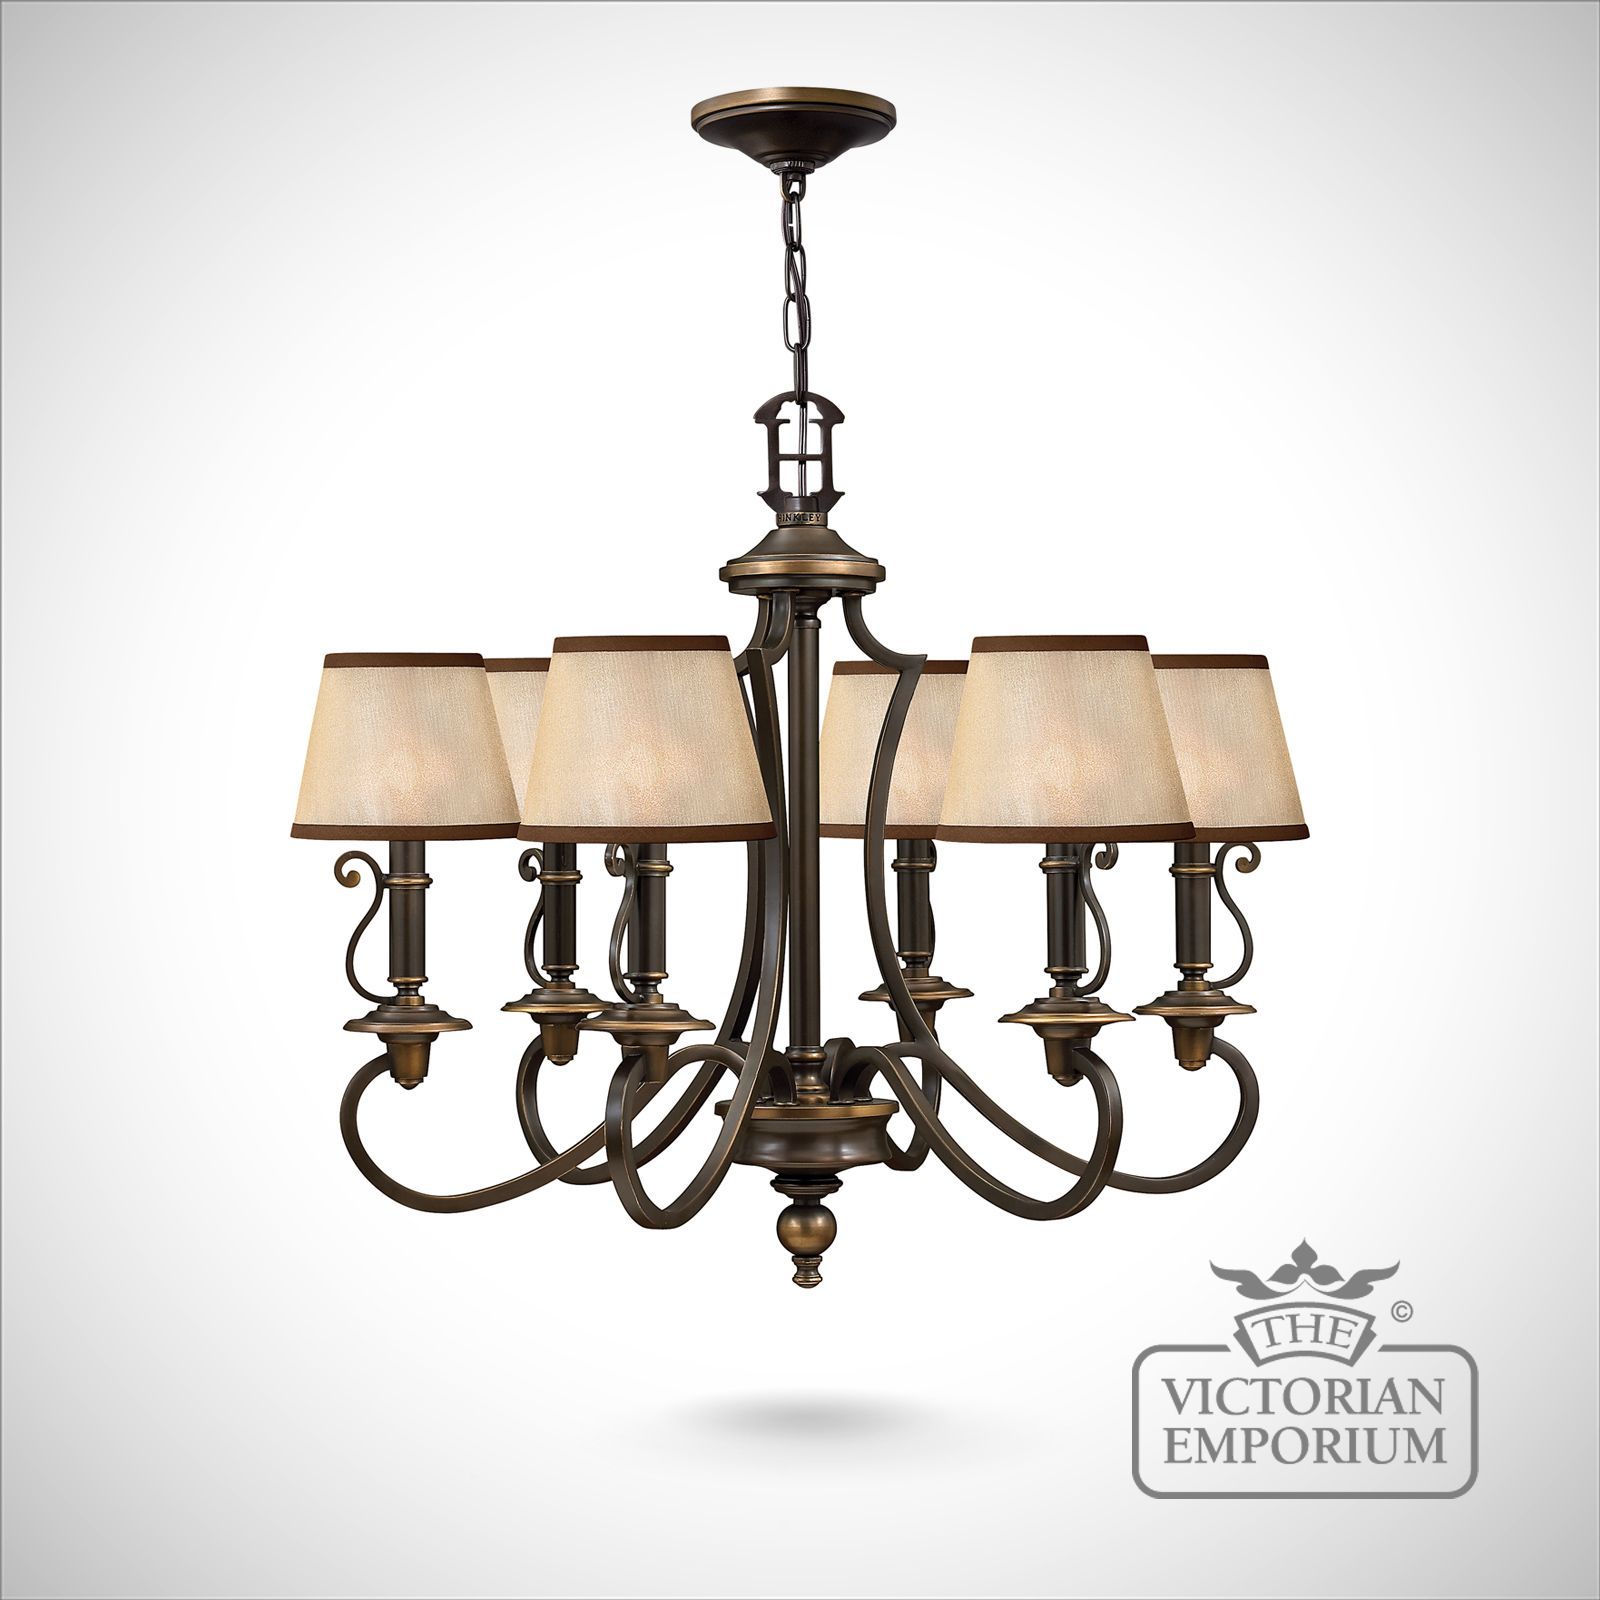 Plymouth 6 Light Pendant Chandelier | Ceiling Chandeliers Intended For Six Light Chandeliers (View 13 of 15)